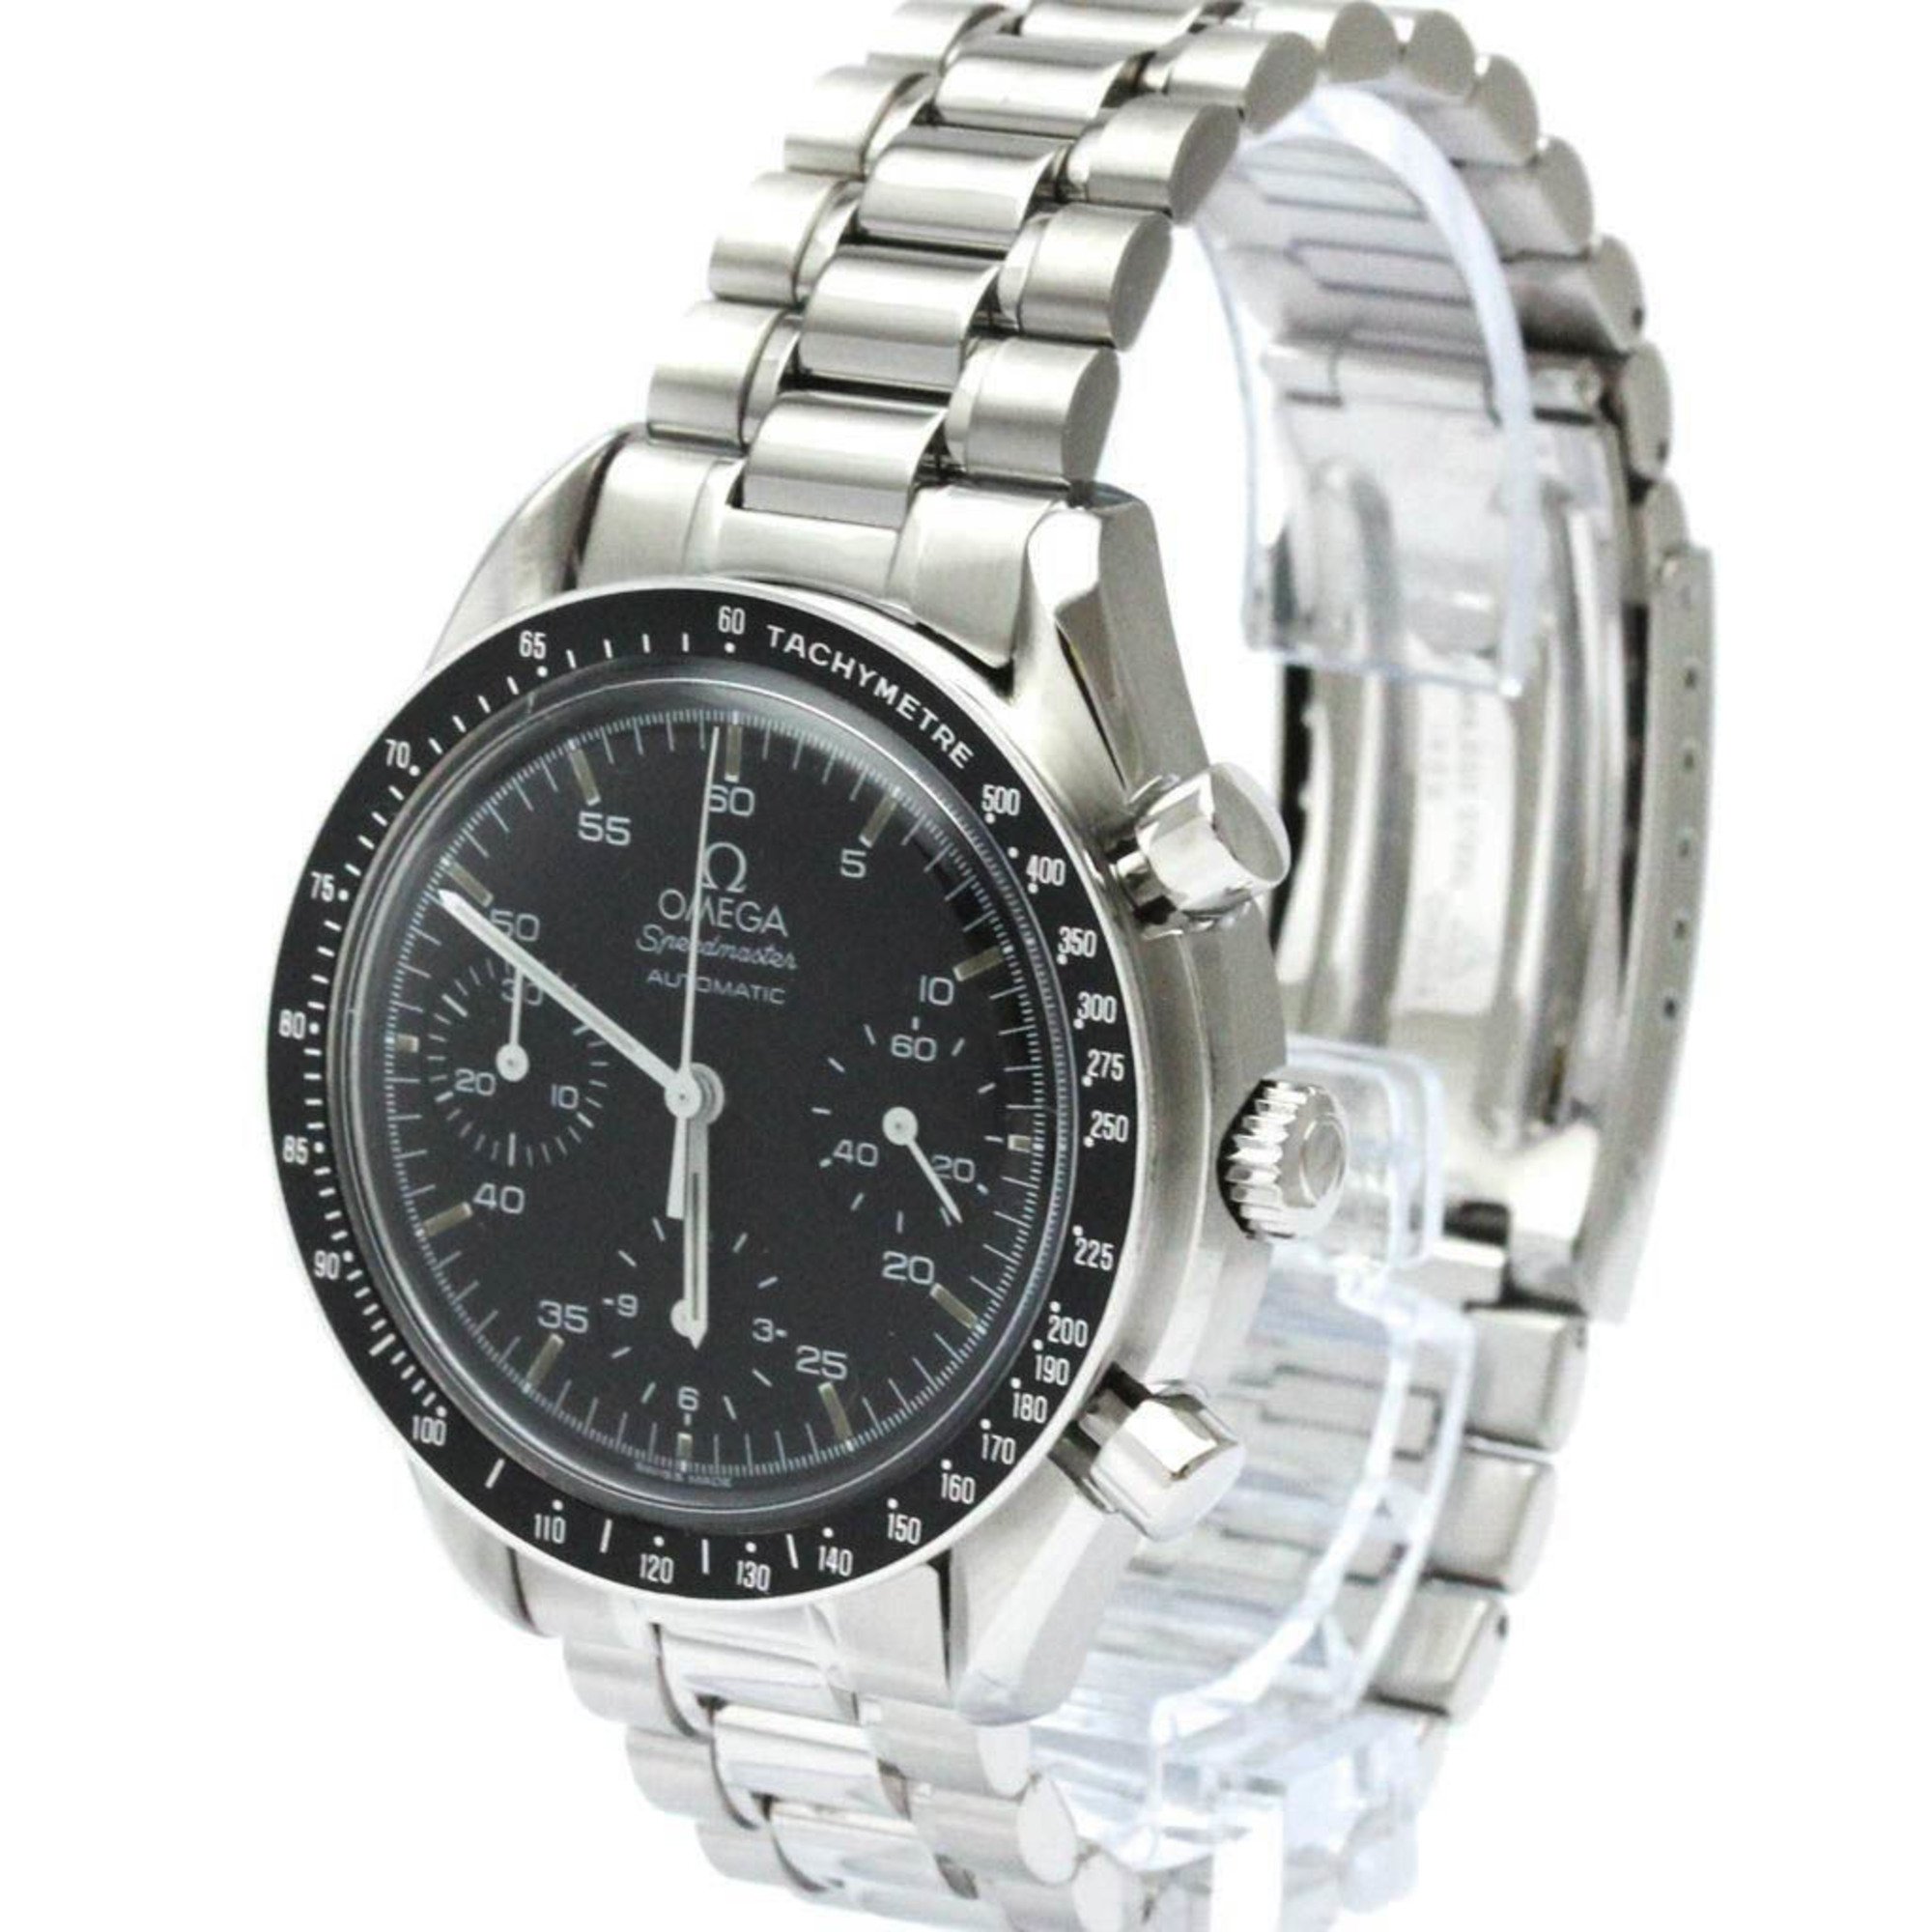 Polished OMEGA Speedmaster Automatic Steel Mens Watch 3510.50 BF566819